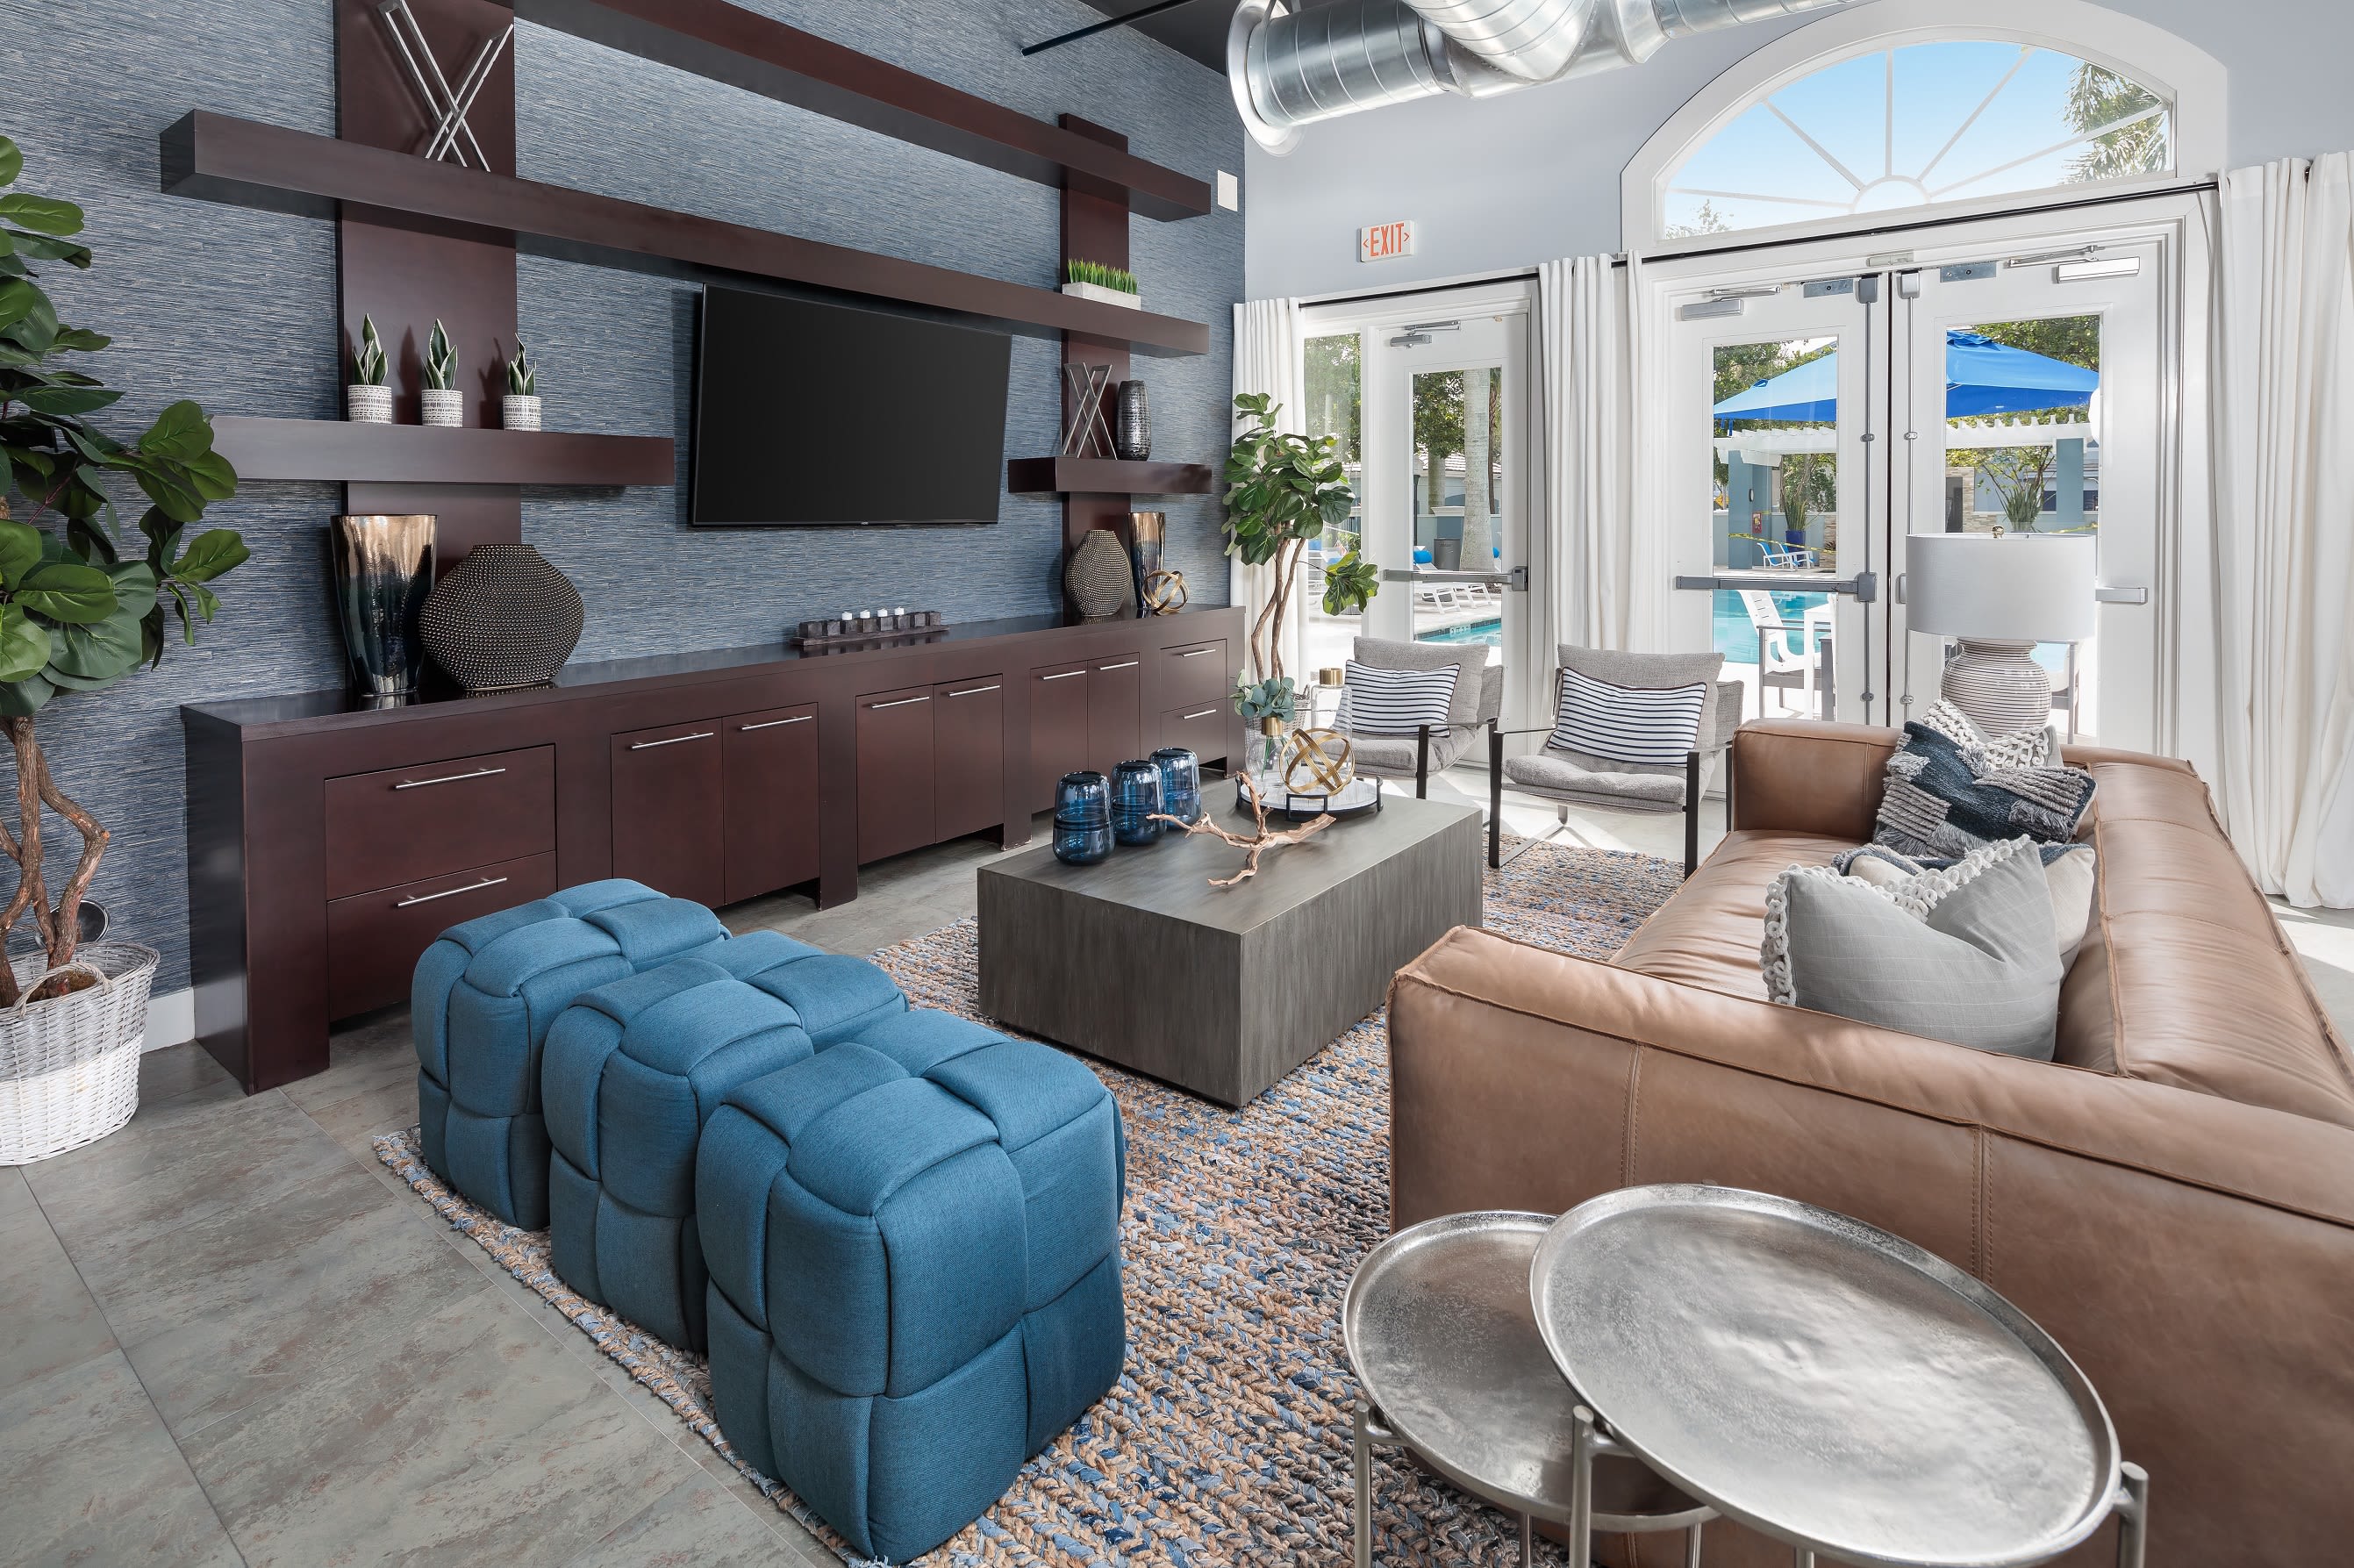 Clubhouse for residents to relax at with their friends at The Pearl in Ft Lauderdale, Florida